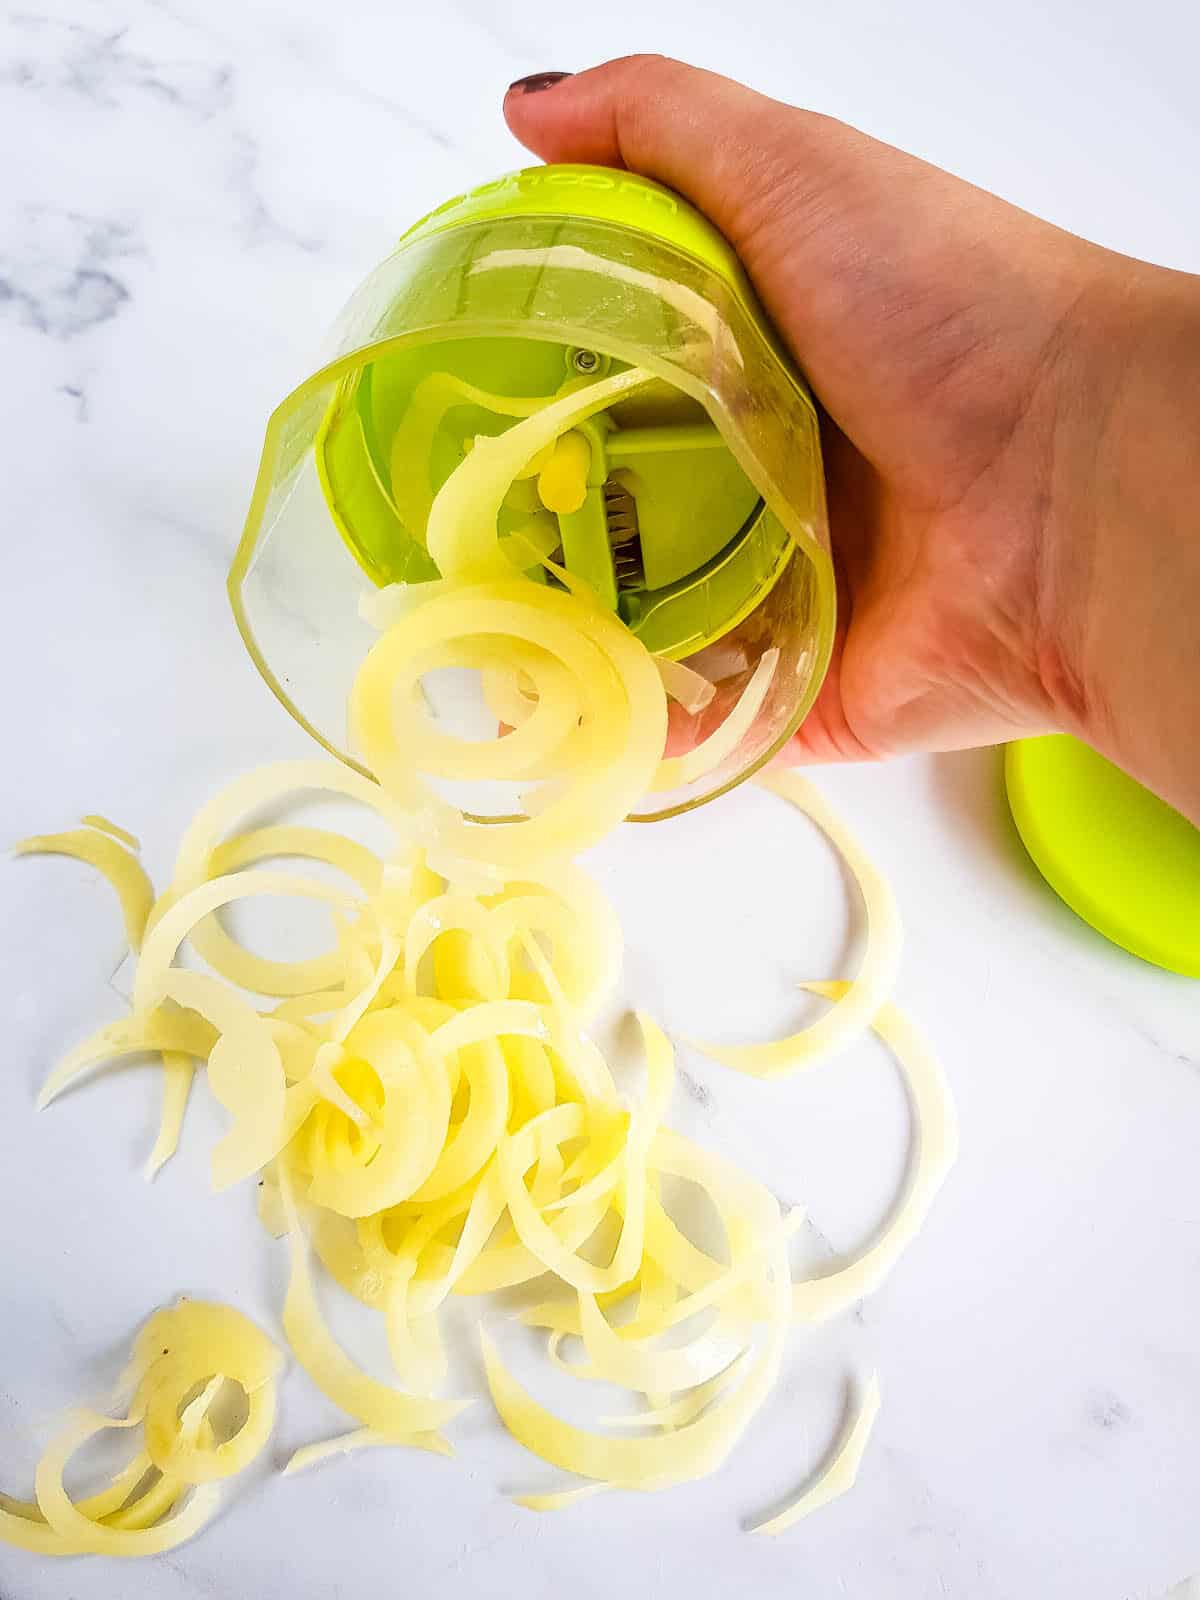 Potatoes being spiralized.